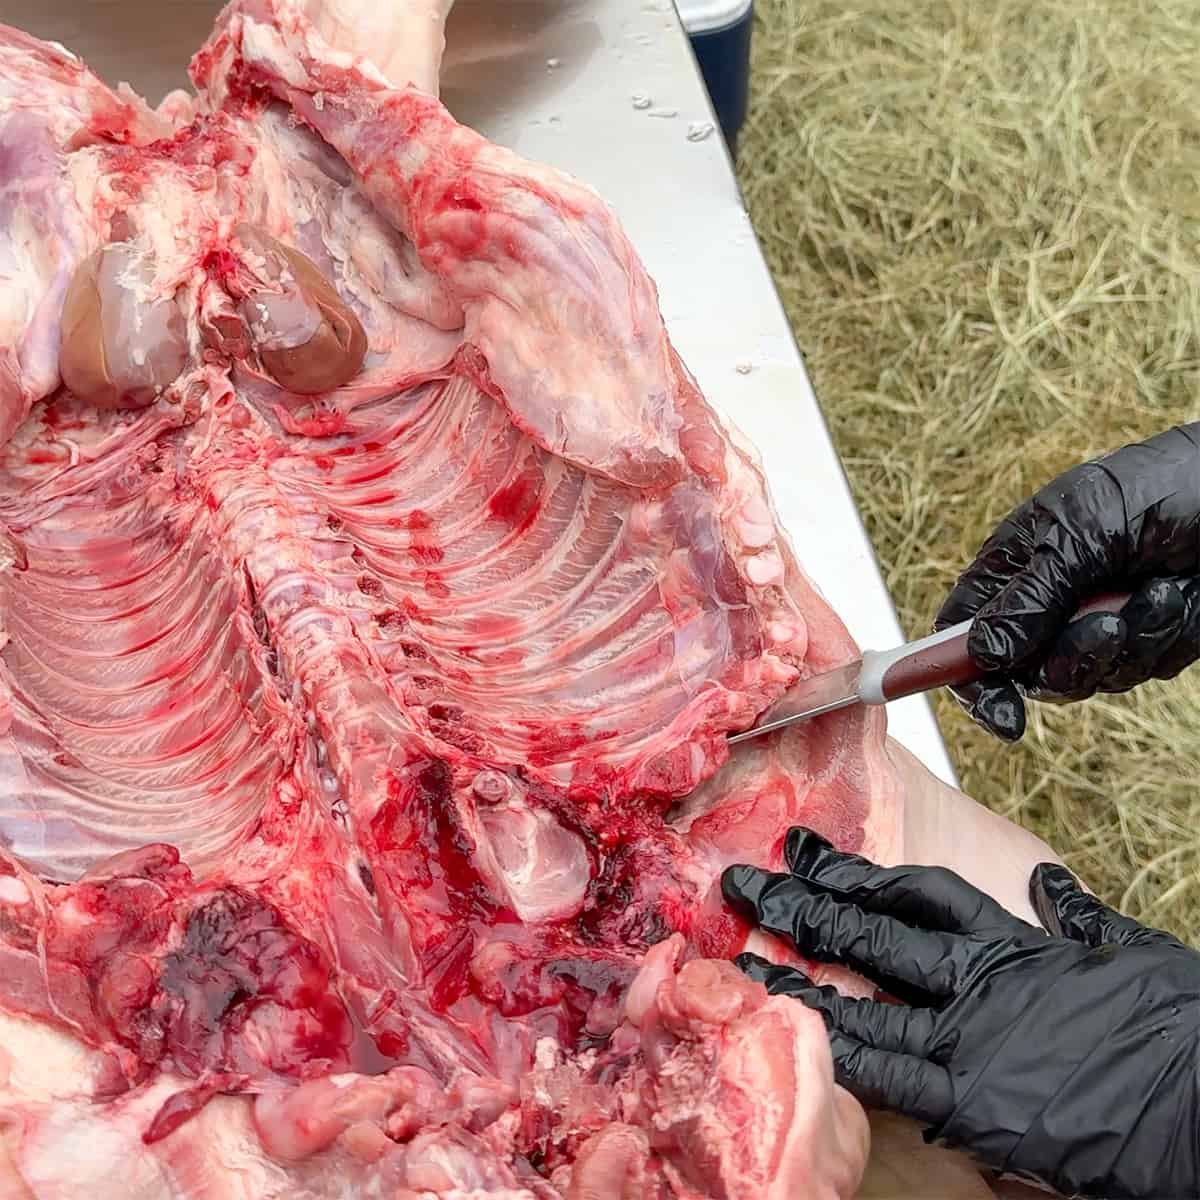 Running knife under top four ribs.